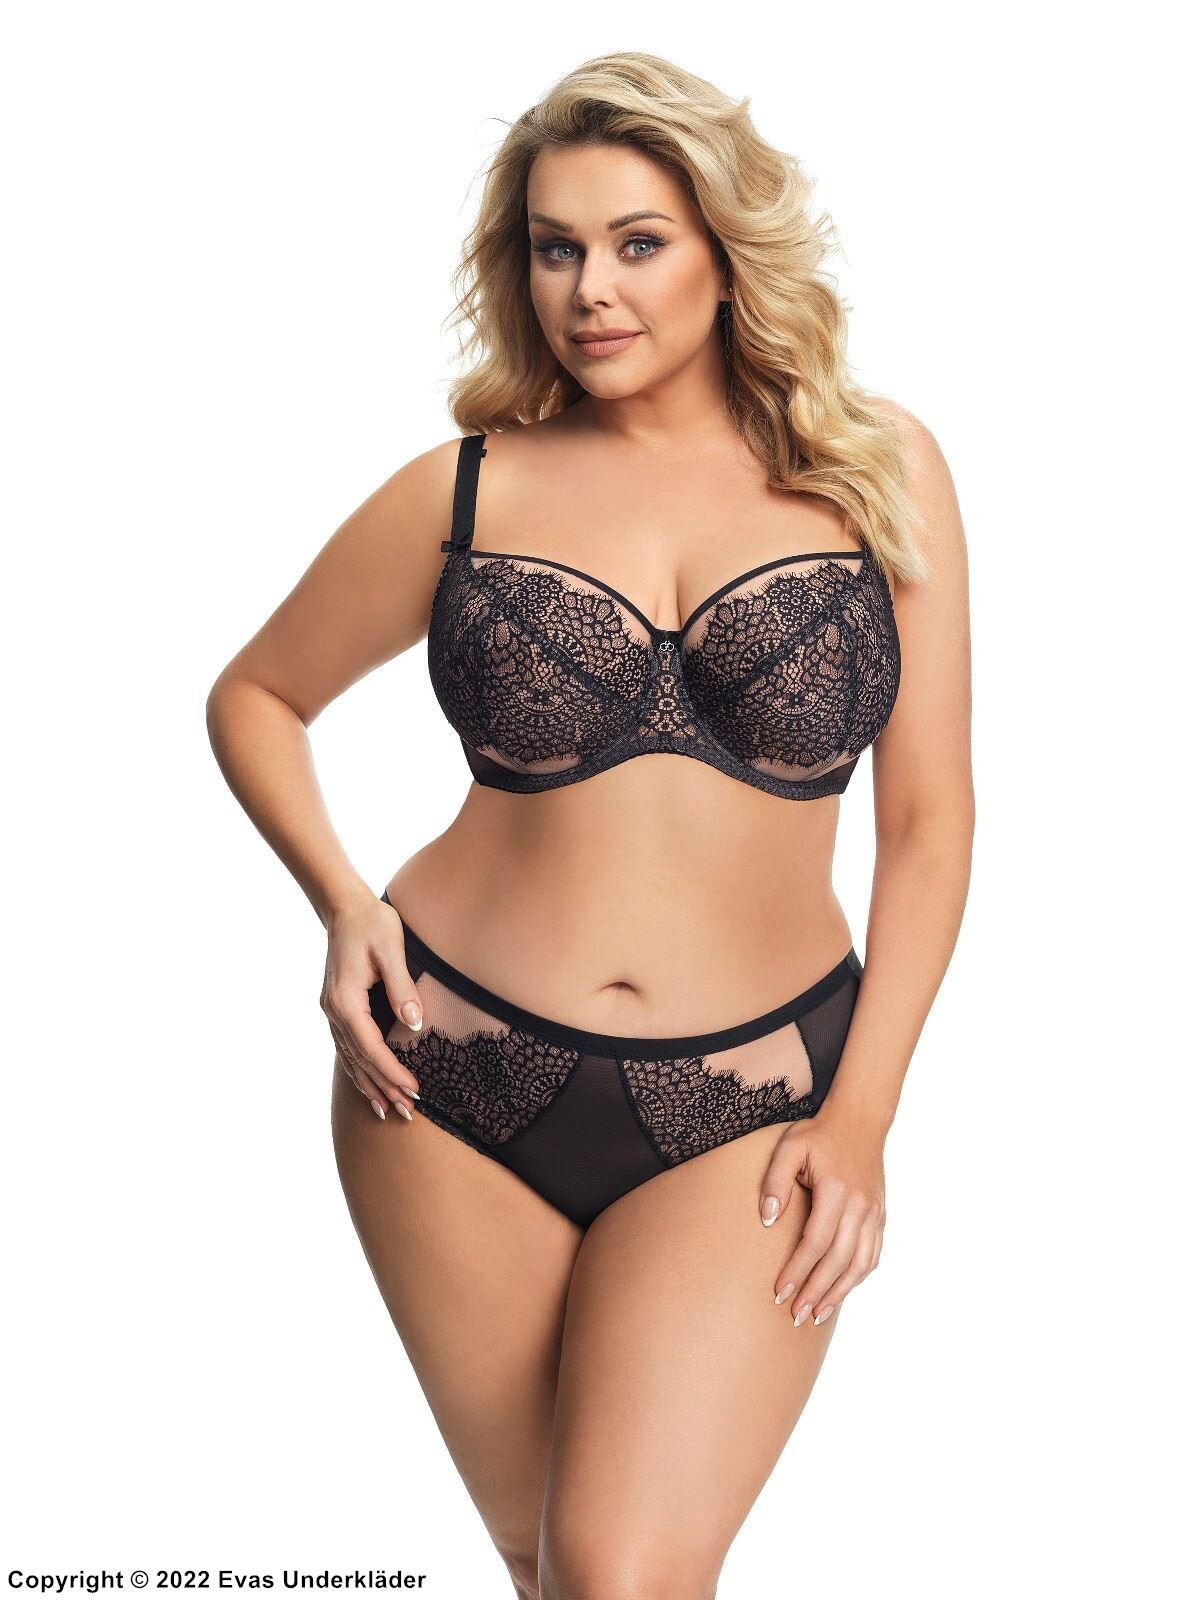 Romantic big cup bra, wide shoulder straps, partially sheer cups, luxurious lace, D to M-cup